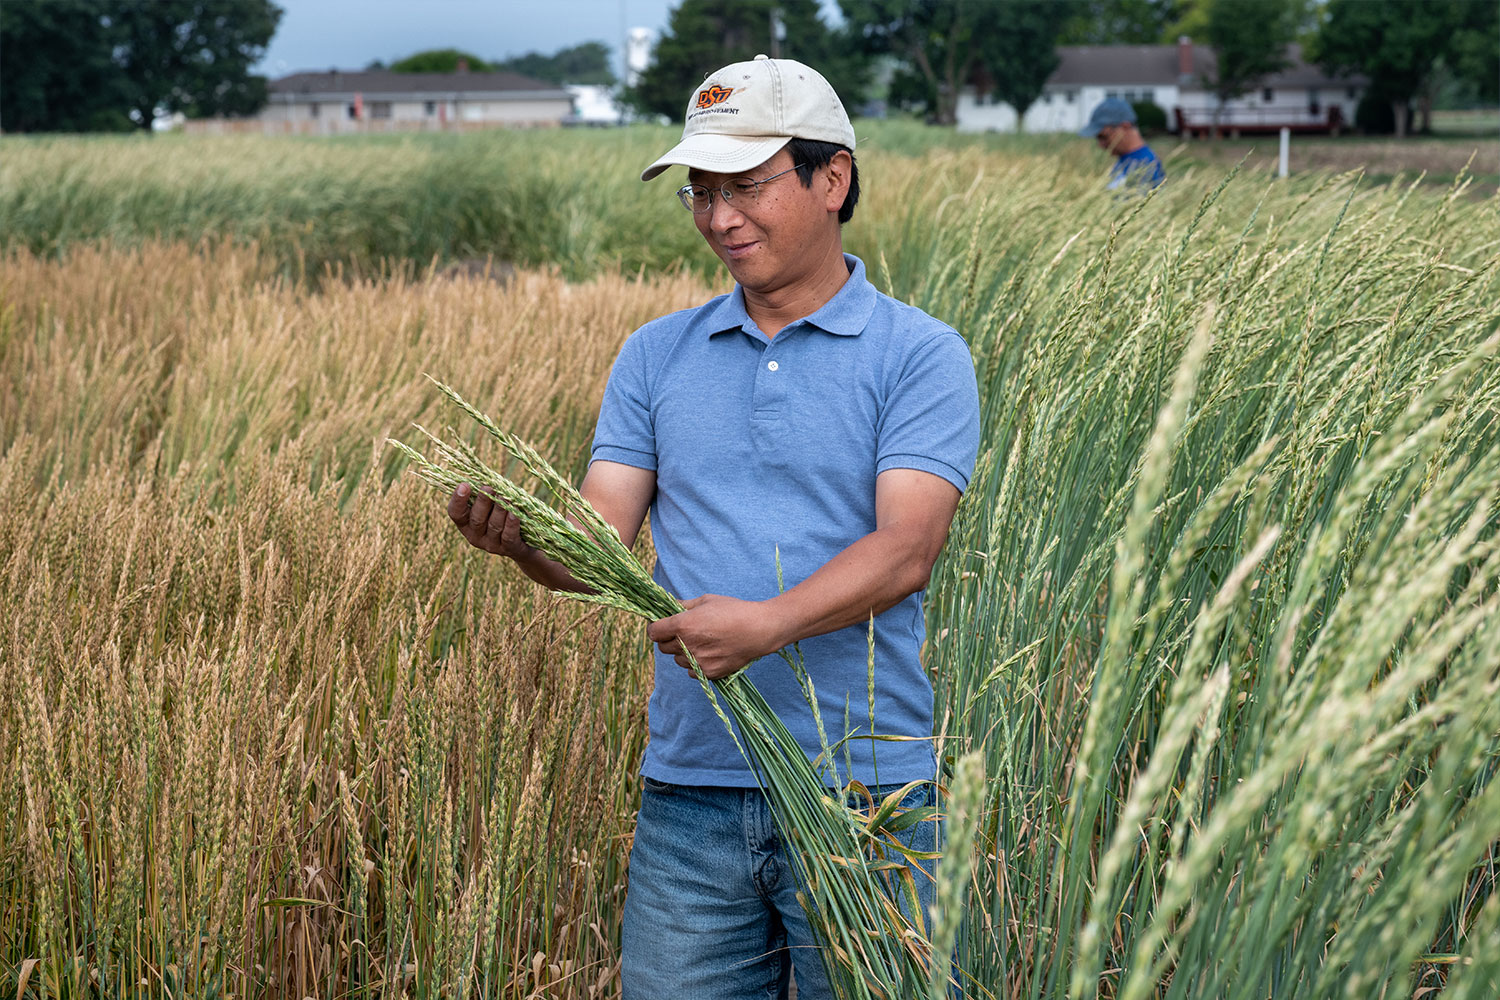 Man standing in wheat field holds wheat in his hands